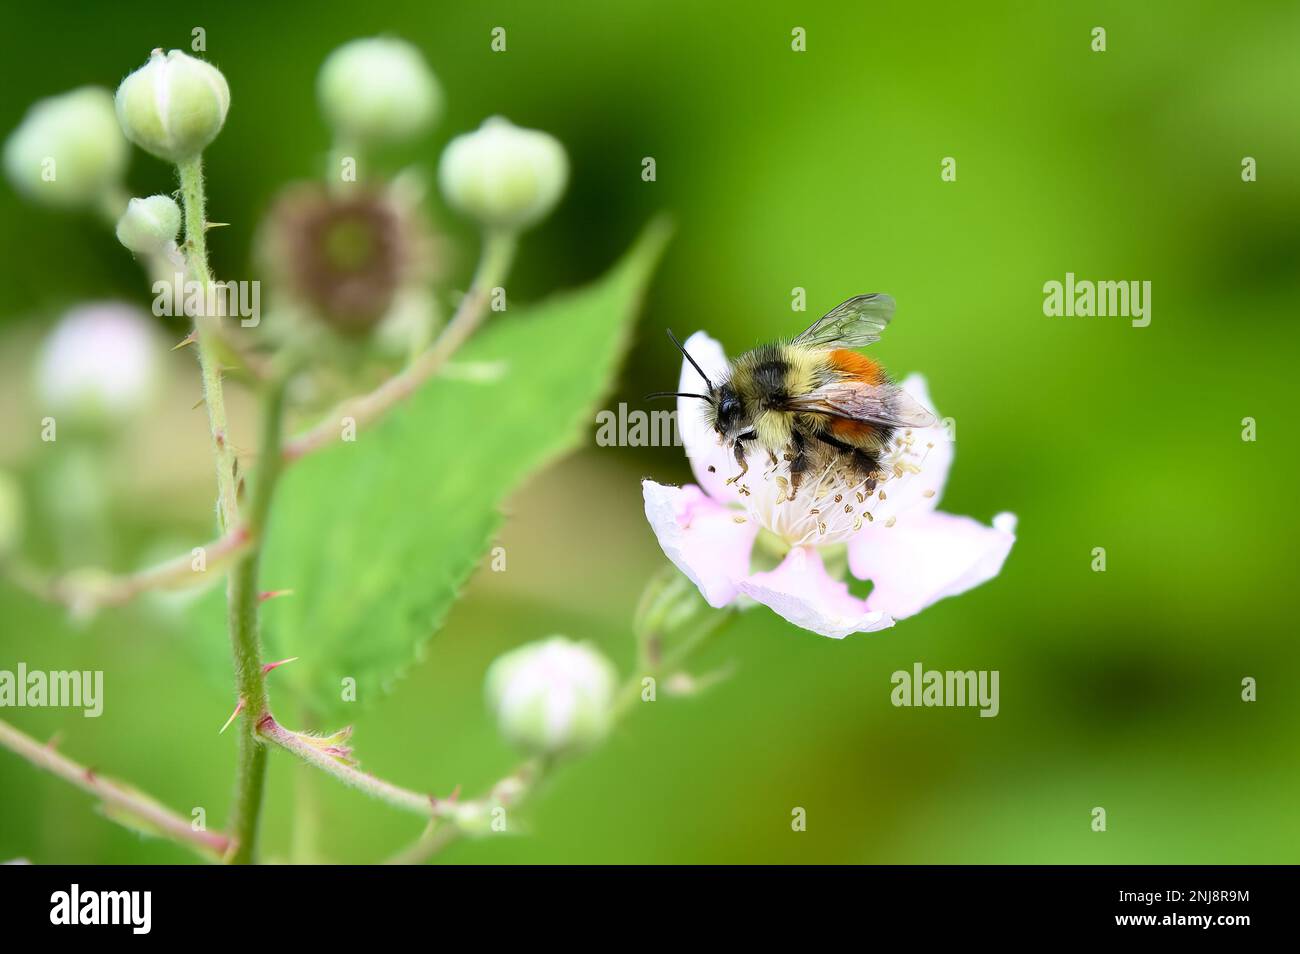 Bumble bee sitting on a white flower Stock Photo